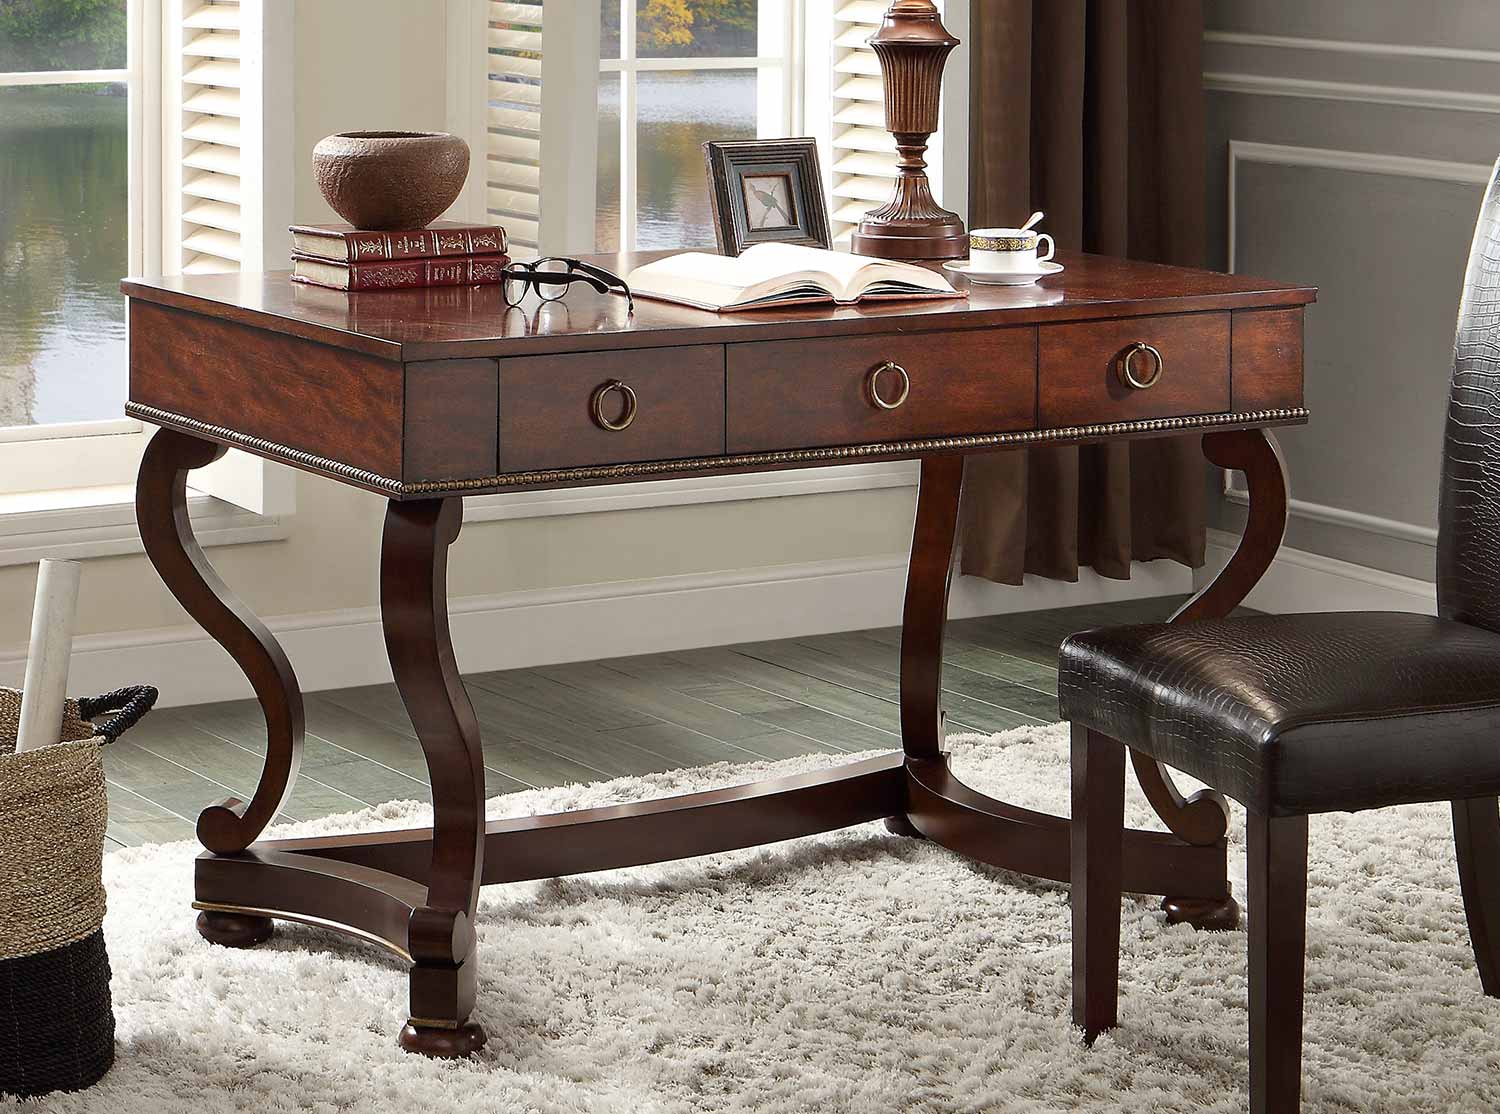 Homelegance Maule Writing Desk with 3 Drawers - Cherry